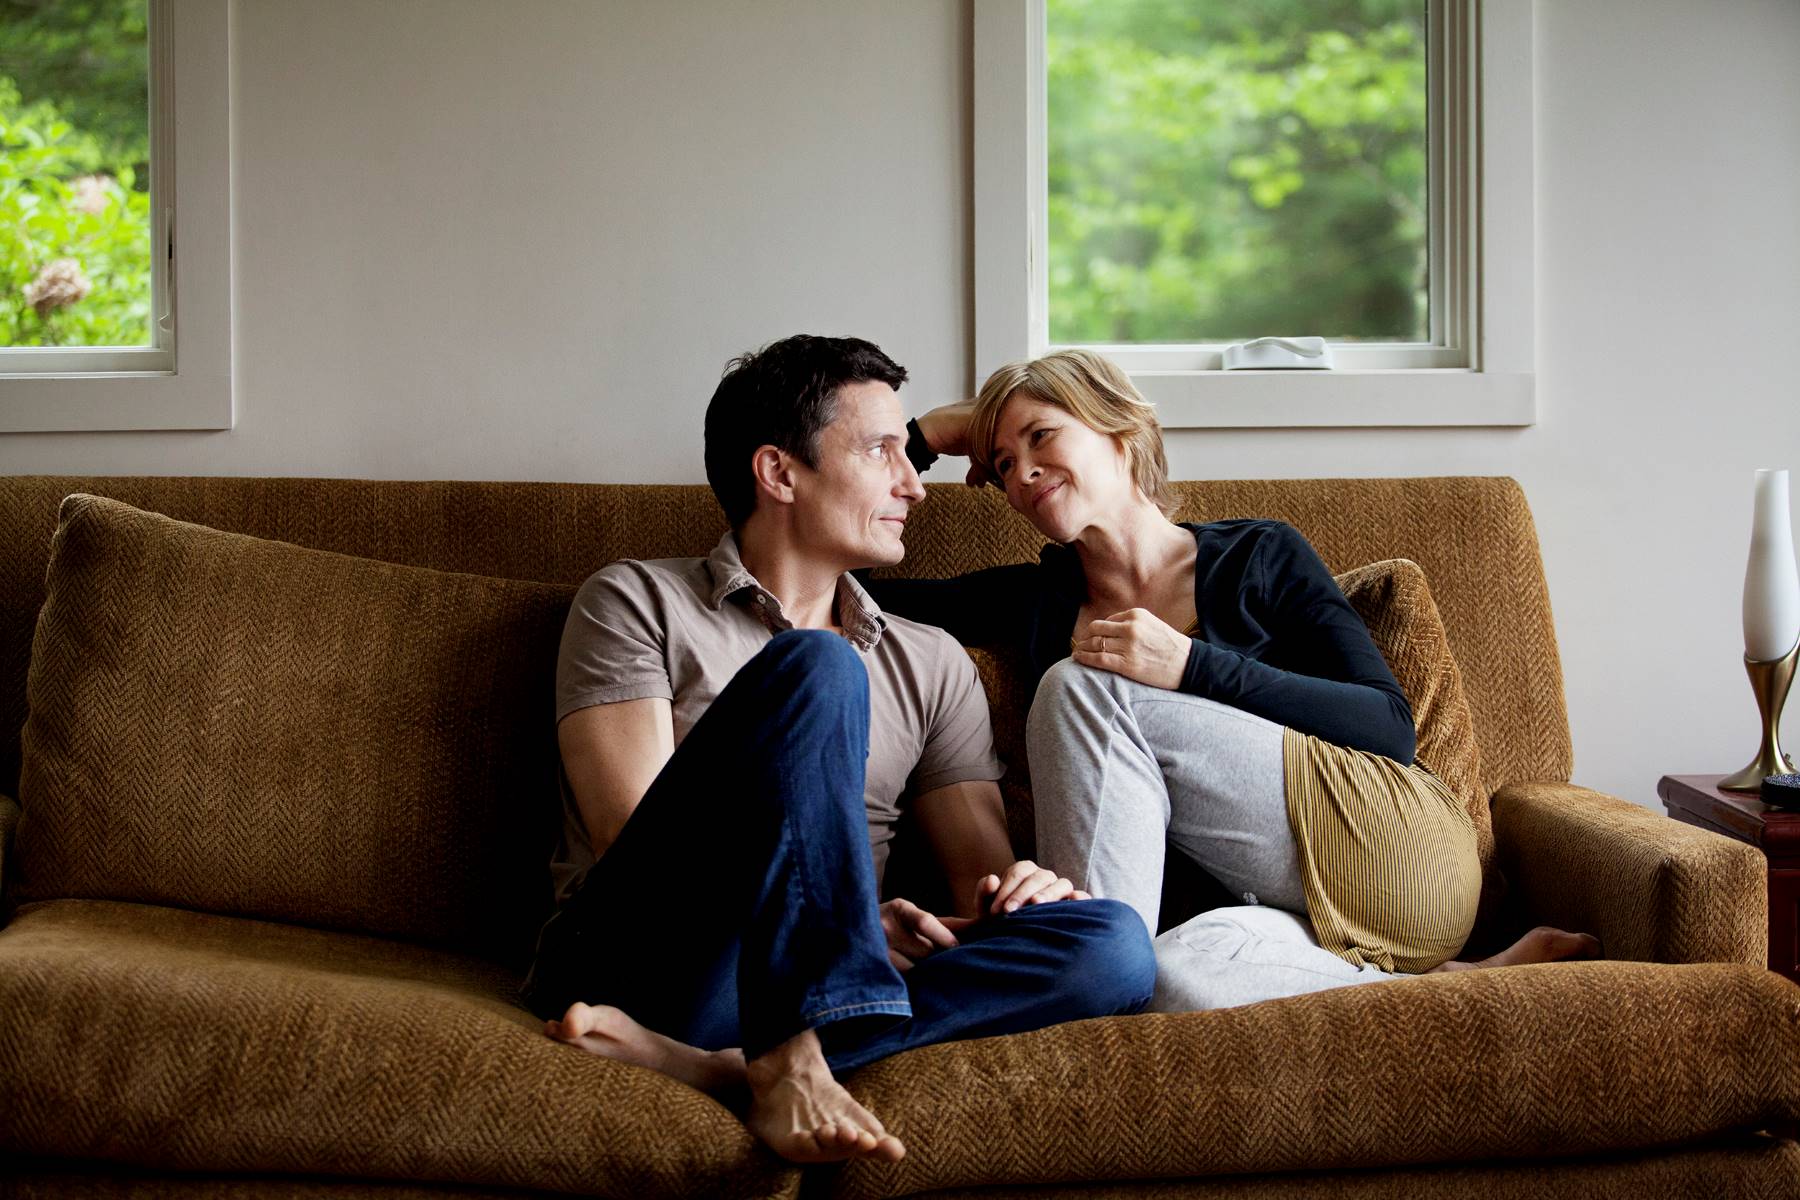 The Ultimate Guide To Winning Back Your Spouse After They've Been With Someone Else